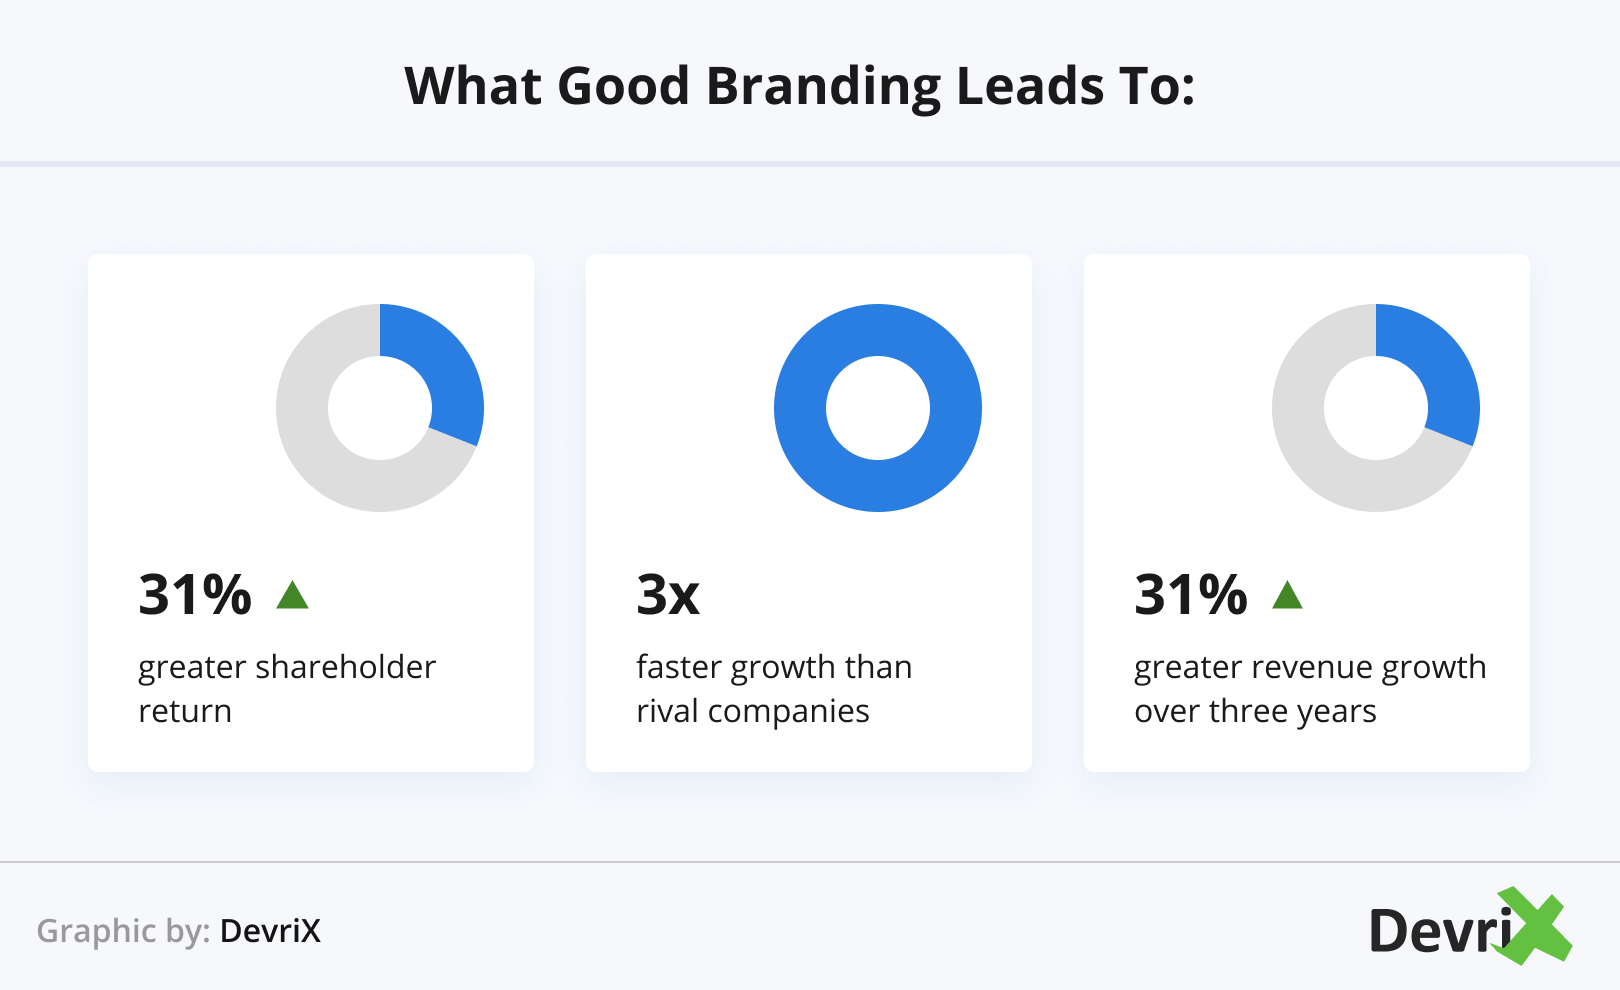 What Good Branding Leads To